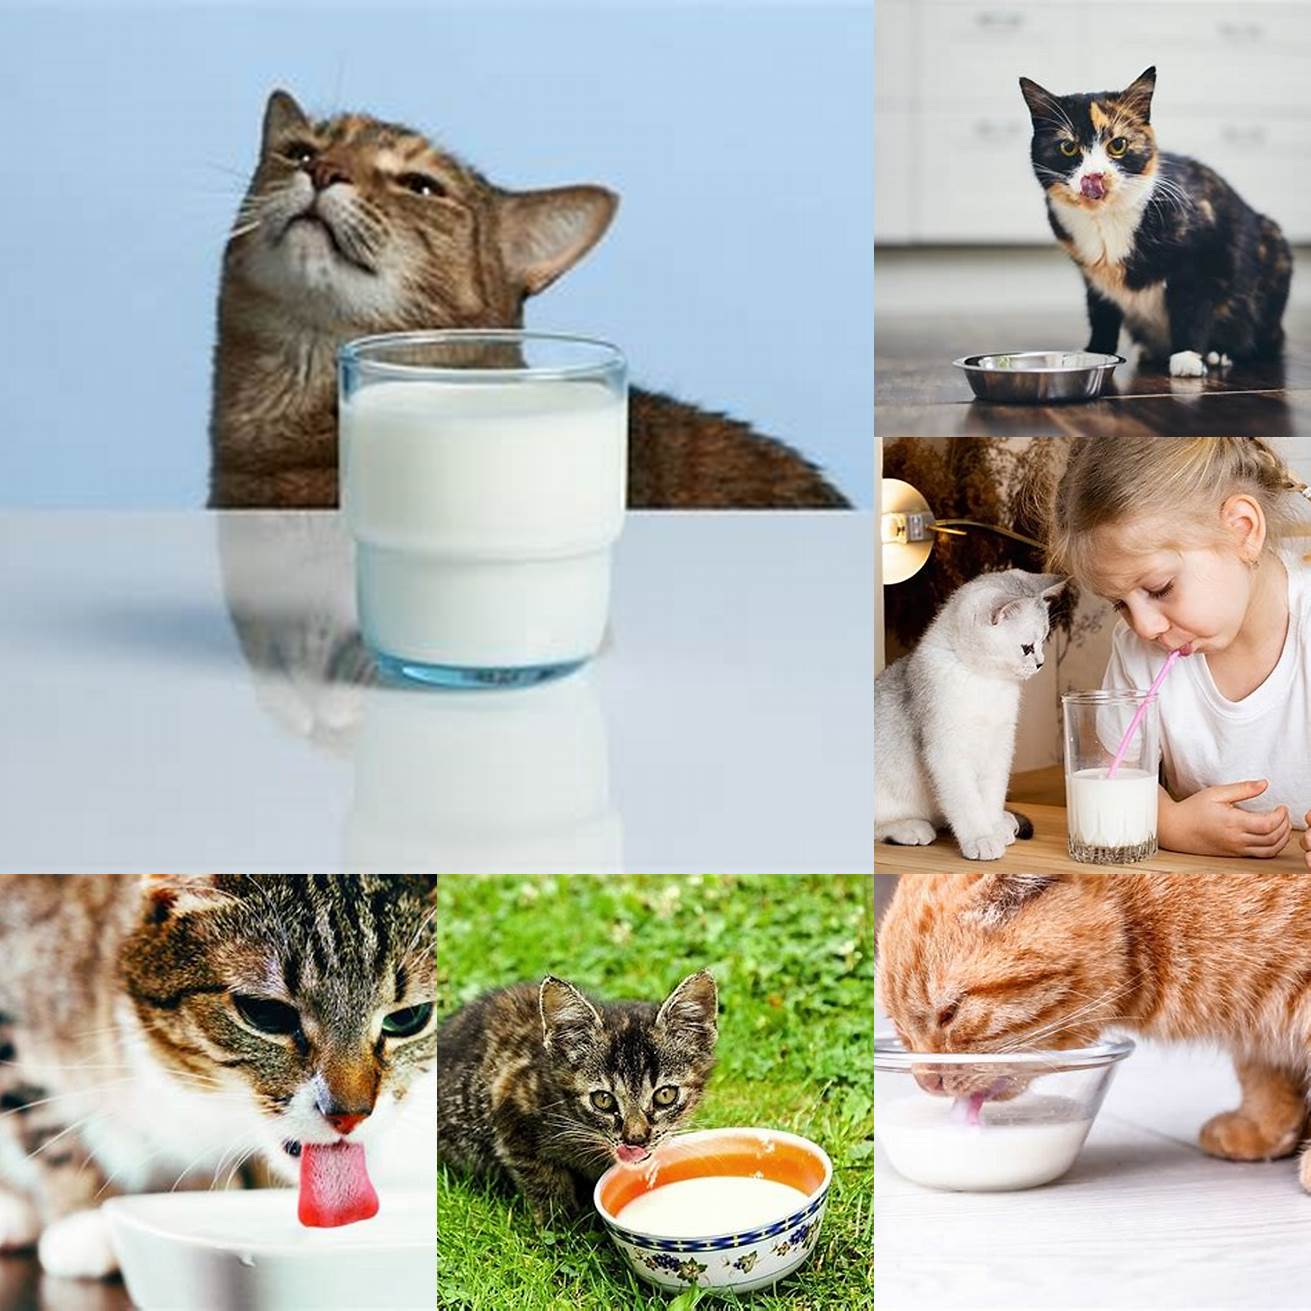 Avoid giving your cat milk as a regular part of their diet